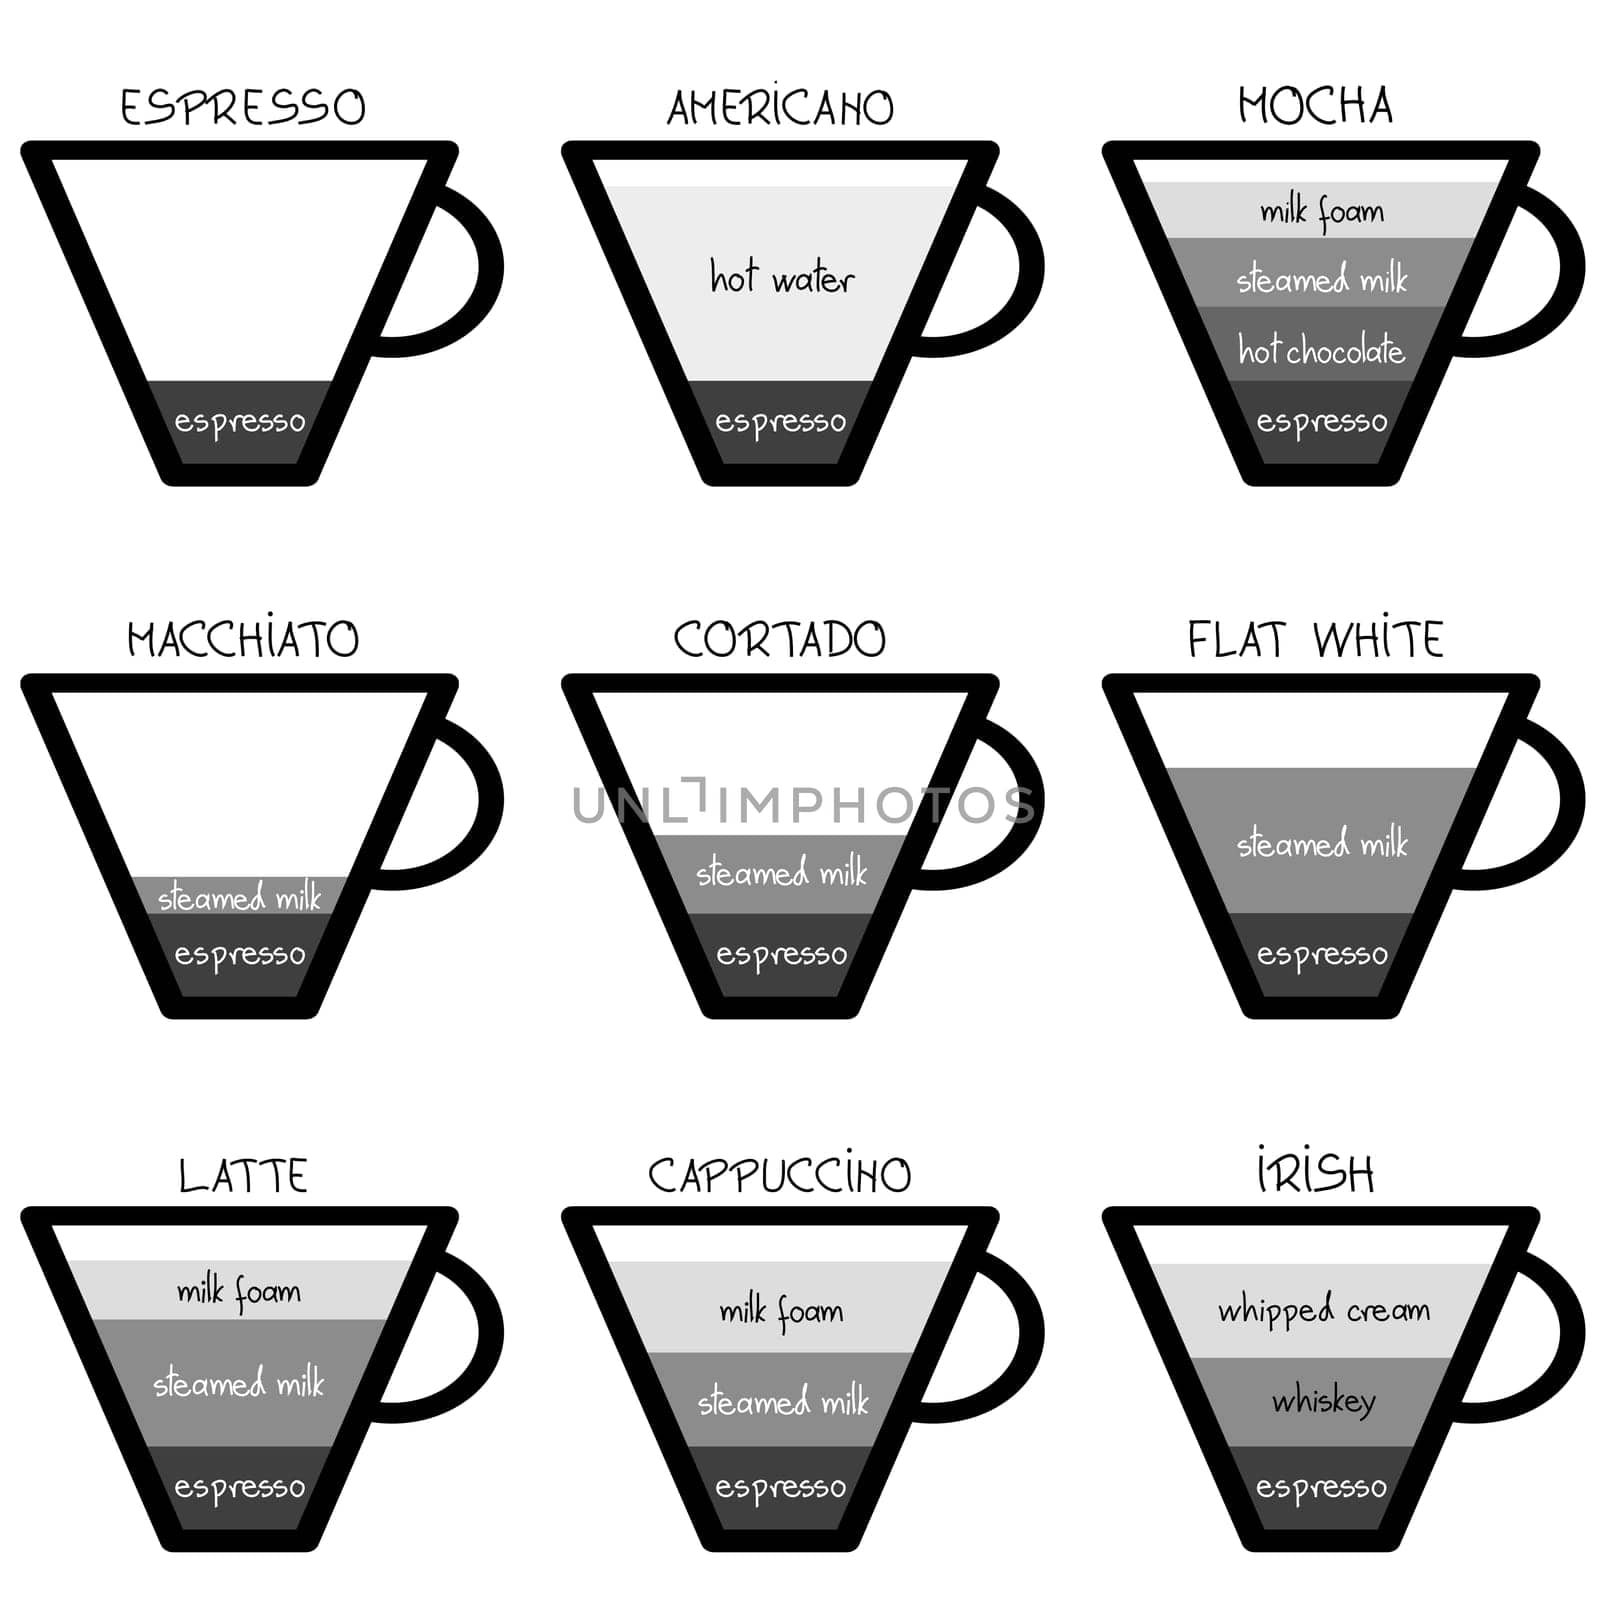 Famous types of coffee and the ingredients from which they are made by hibrida13